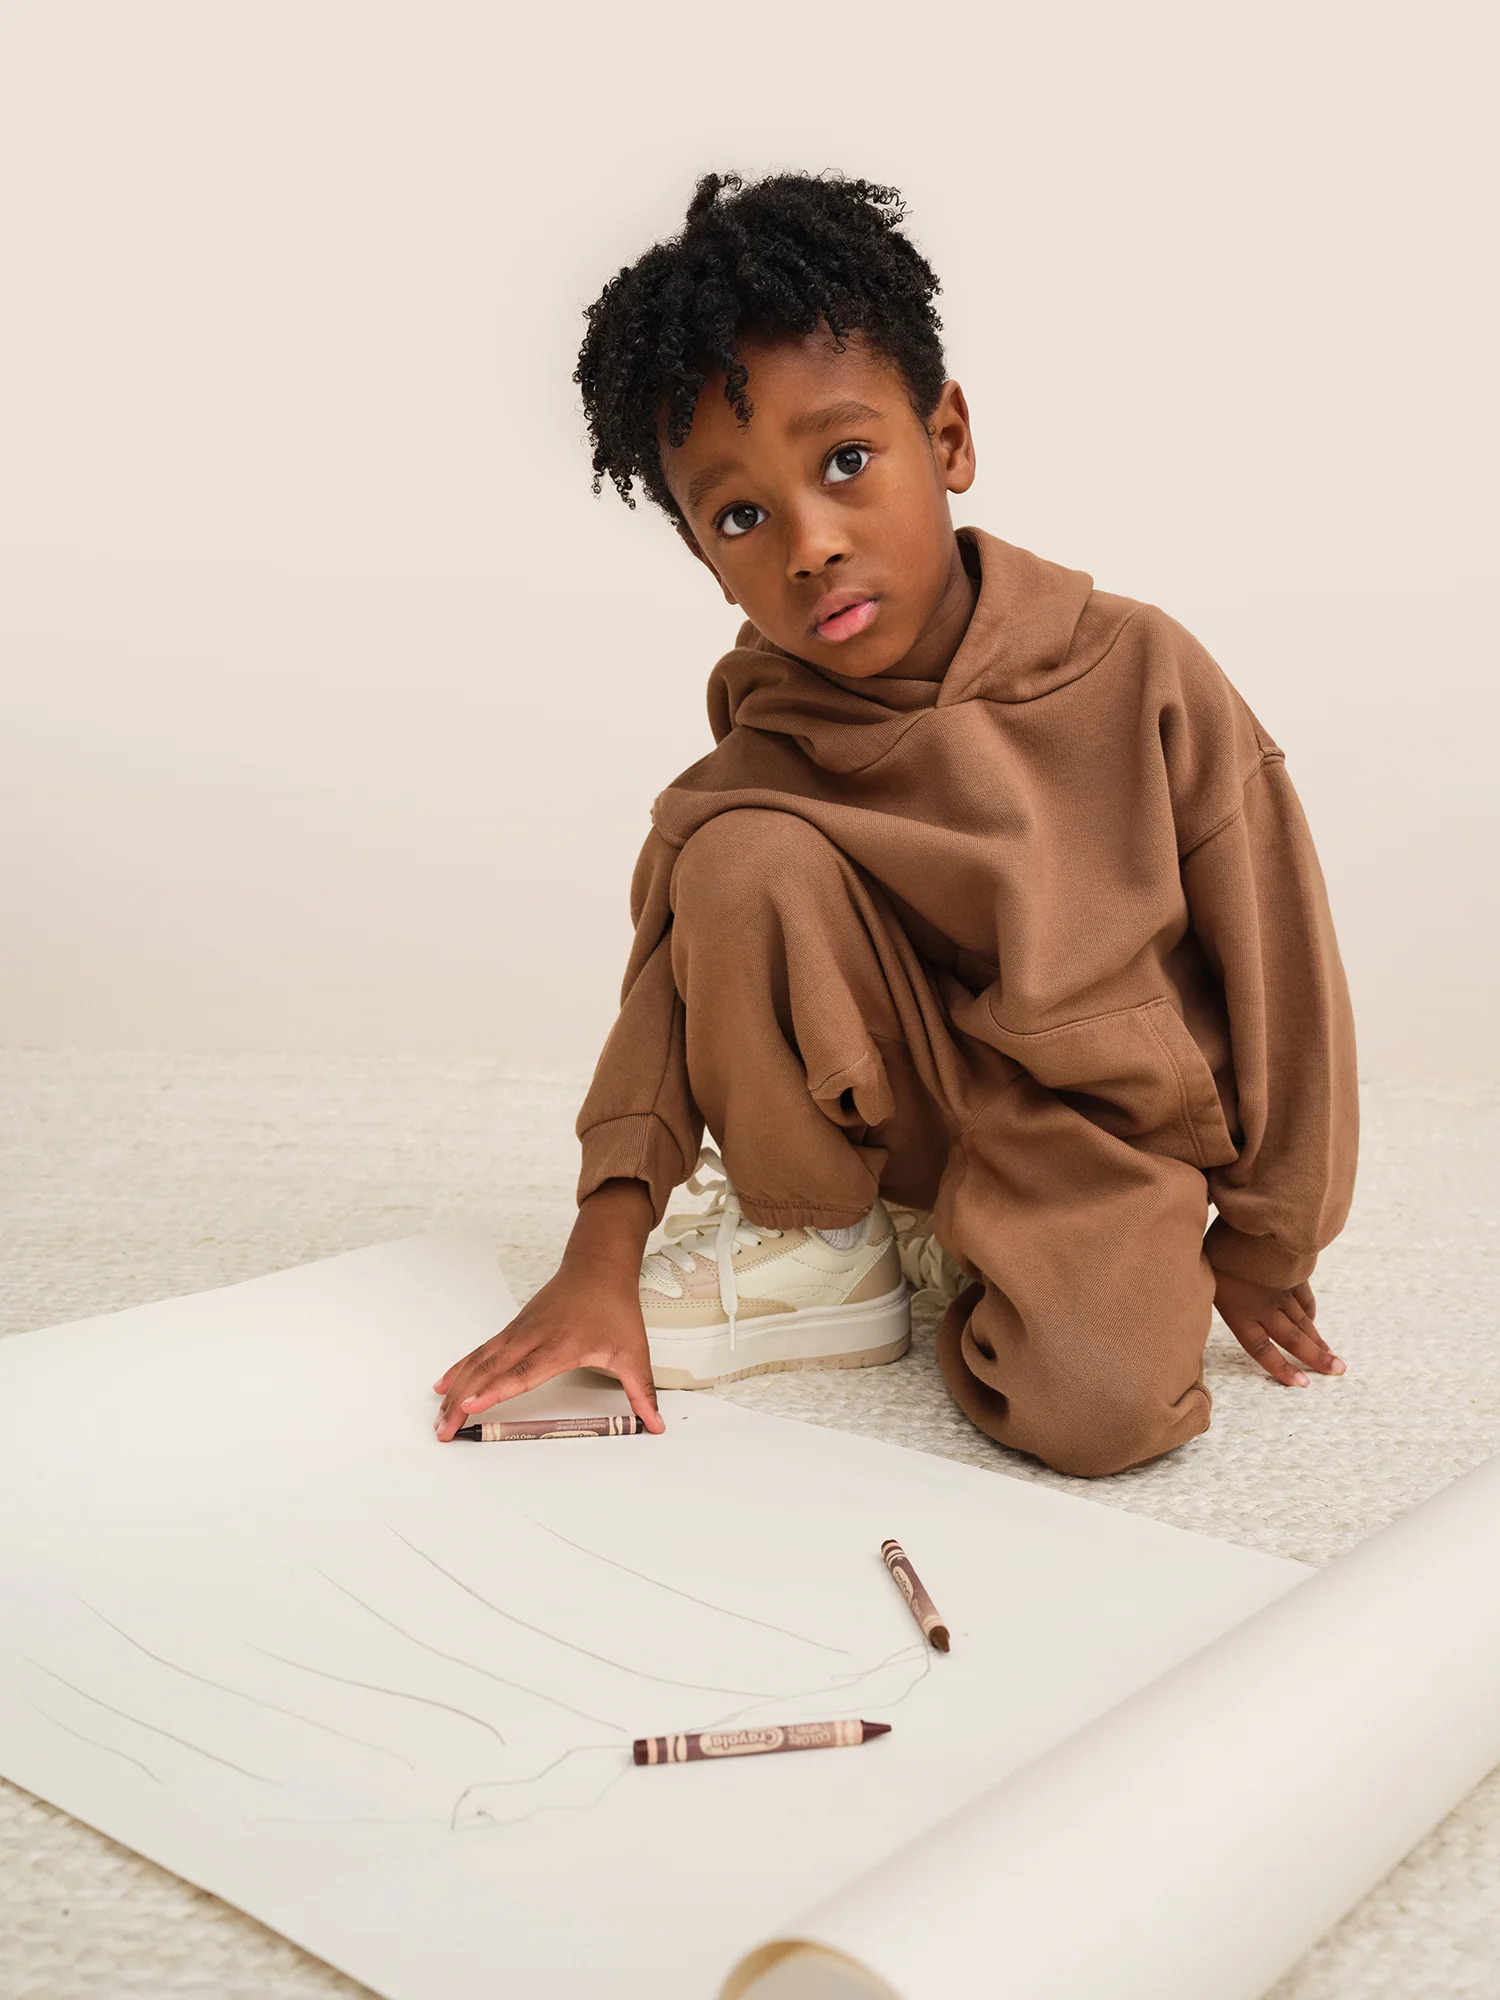 A young boy sitting on the floor and drawing on a piece of paper.